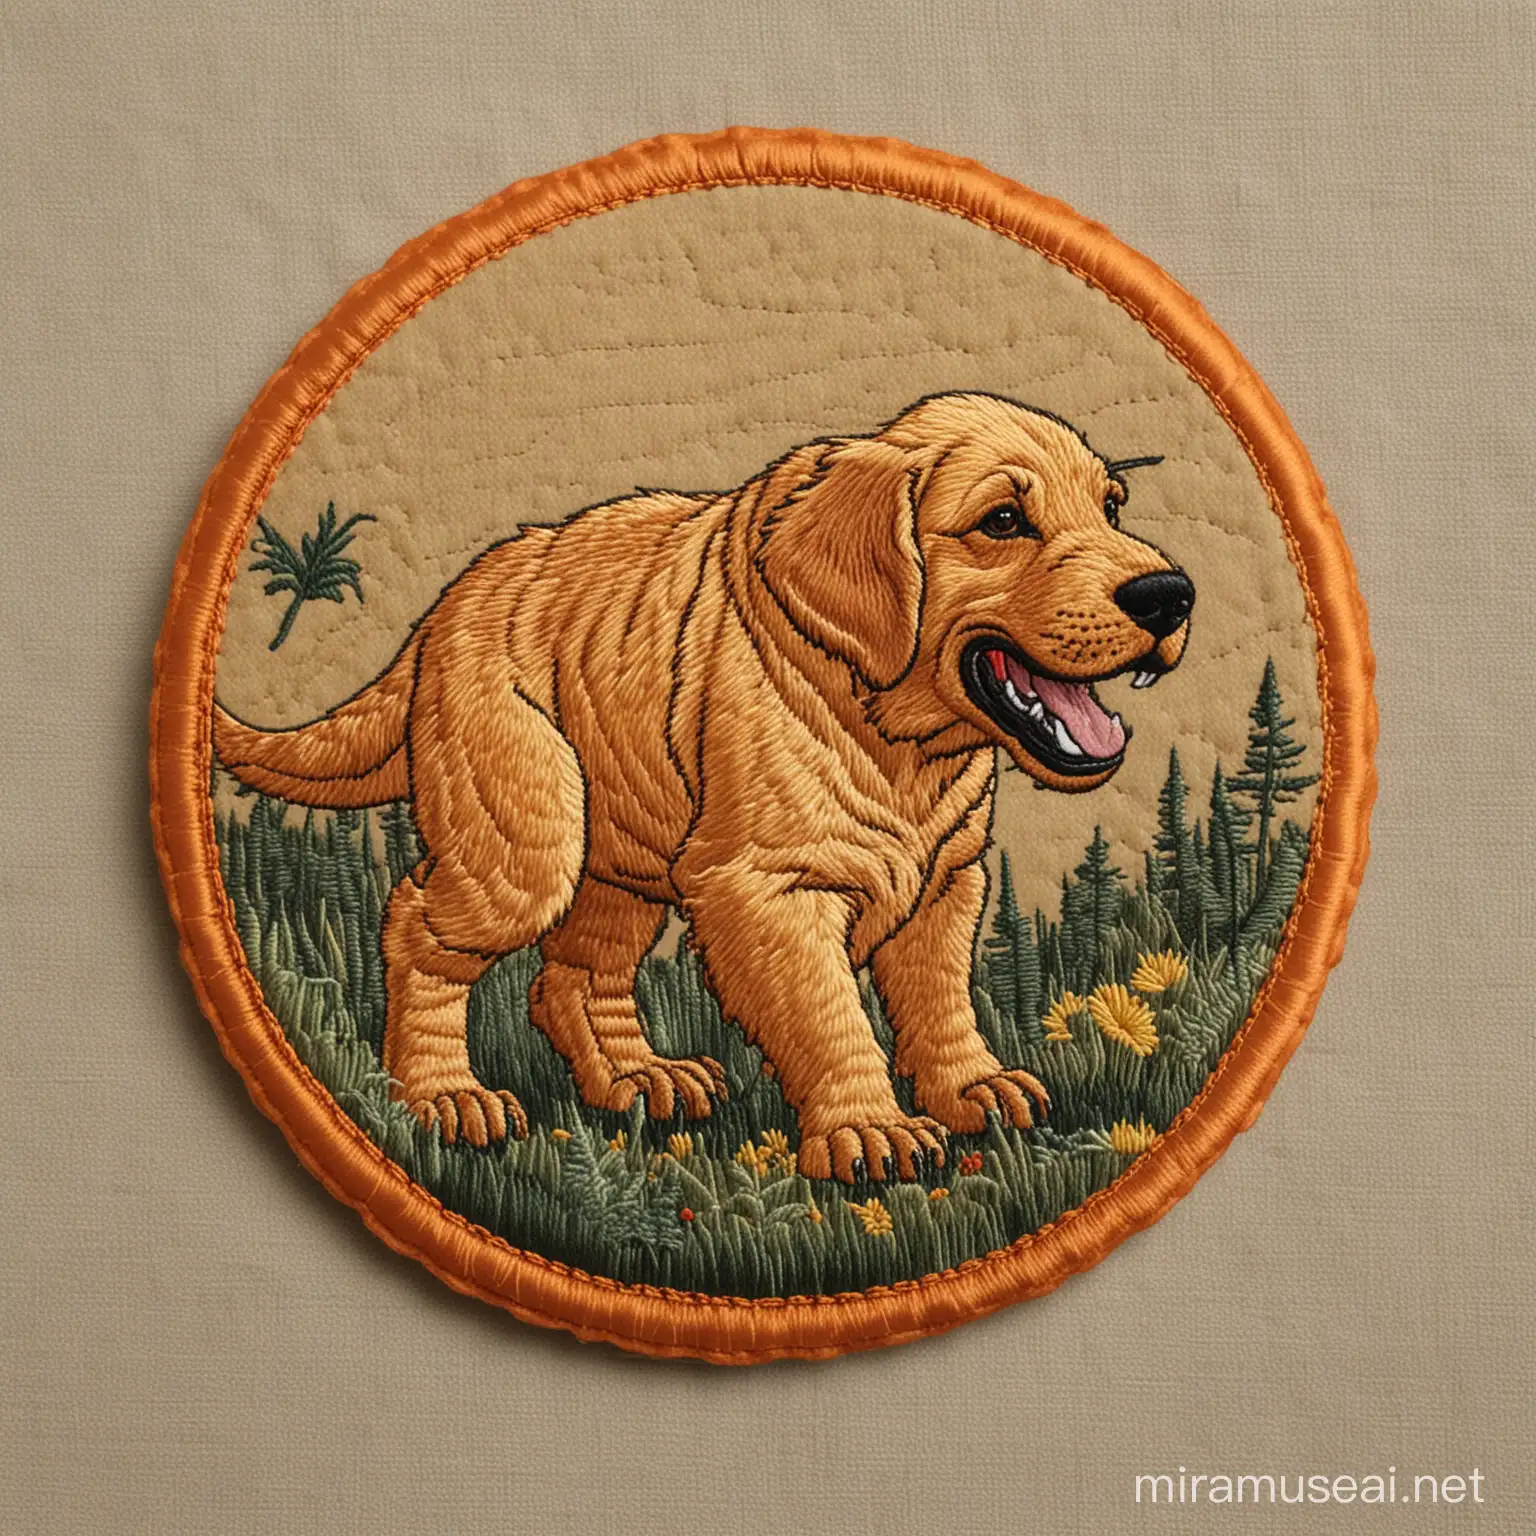 Embroidered Patch of TRex Golden Retriever Puppy